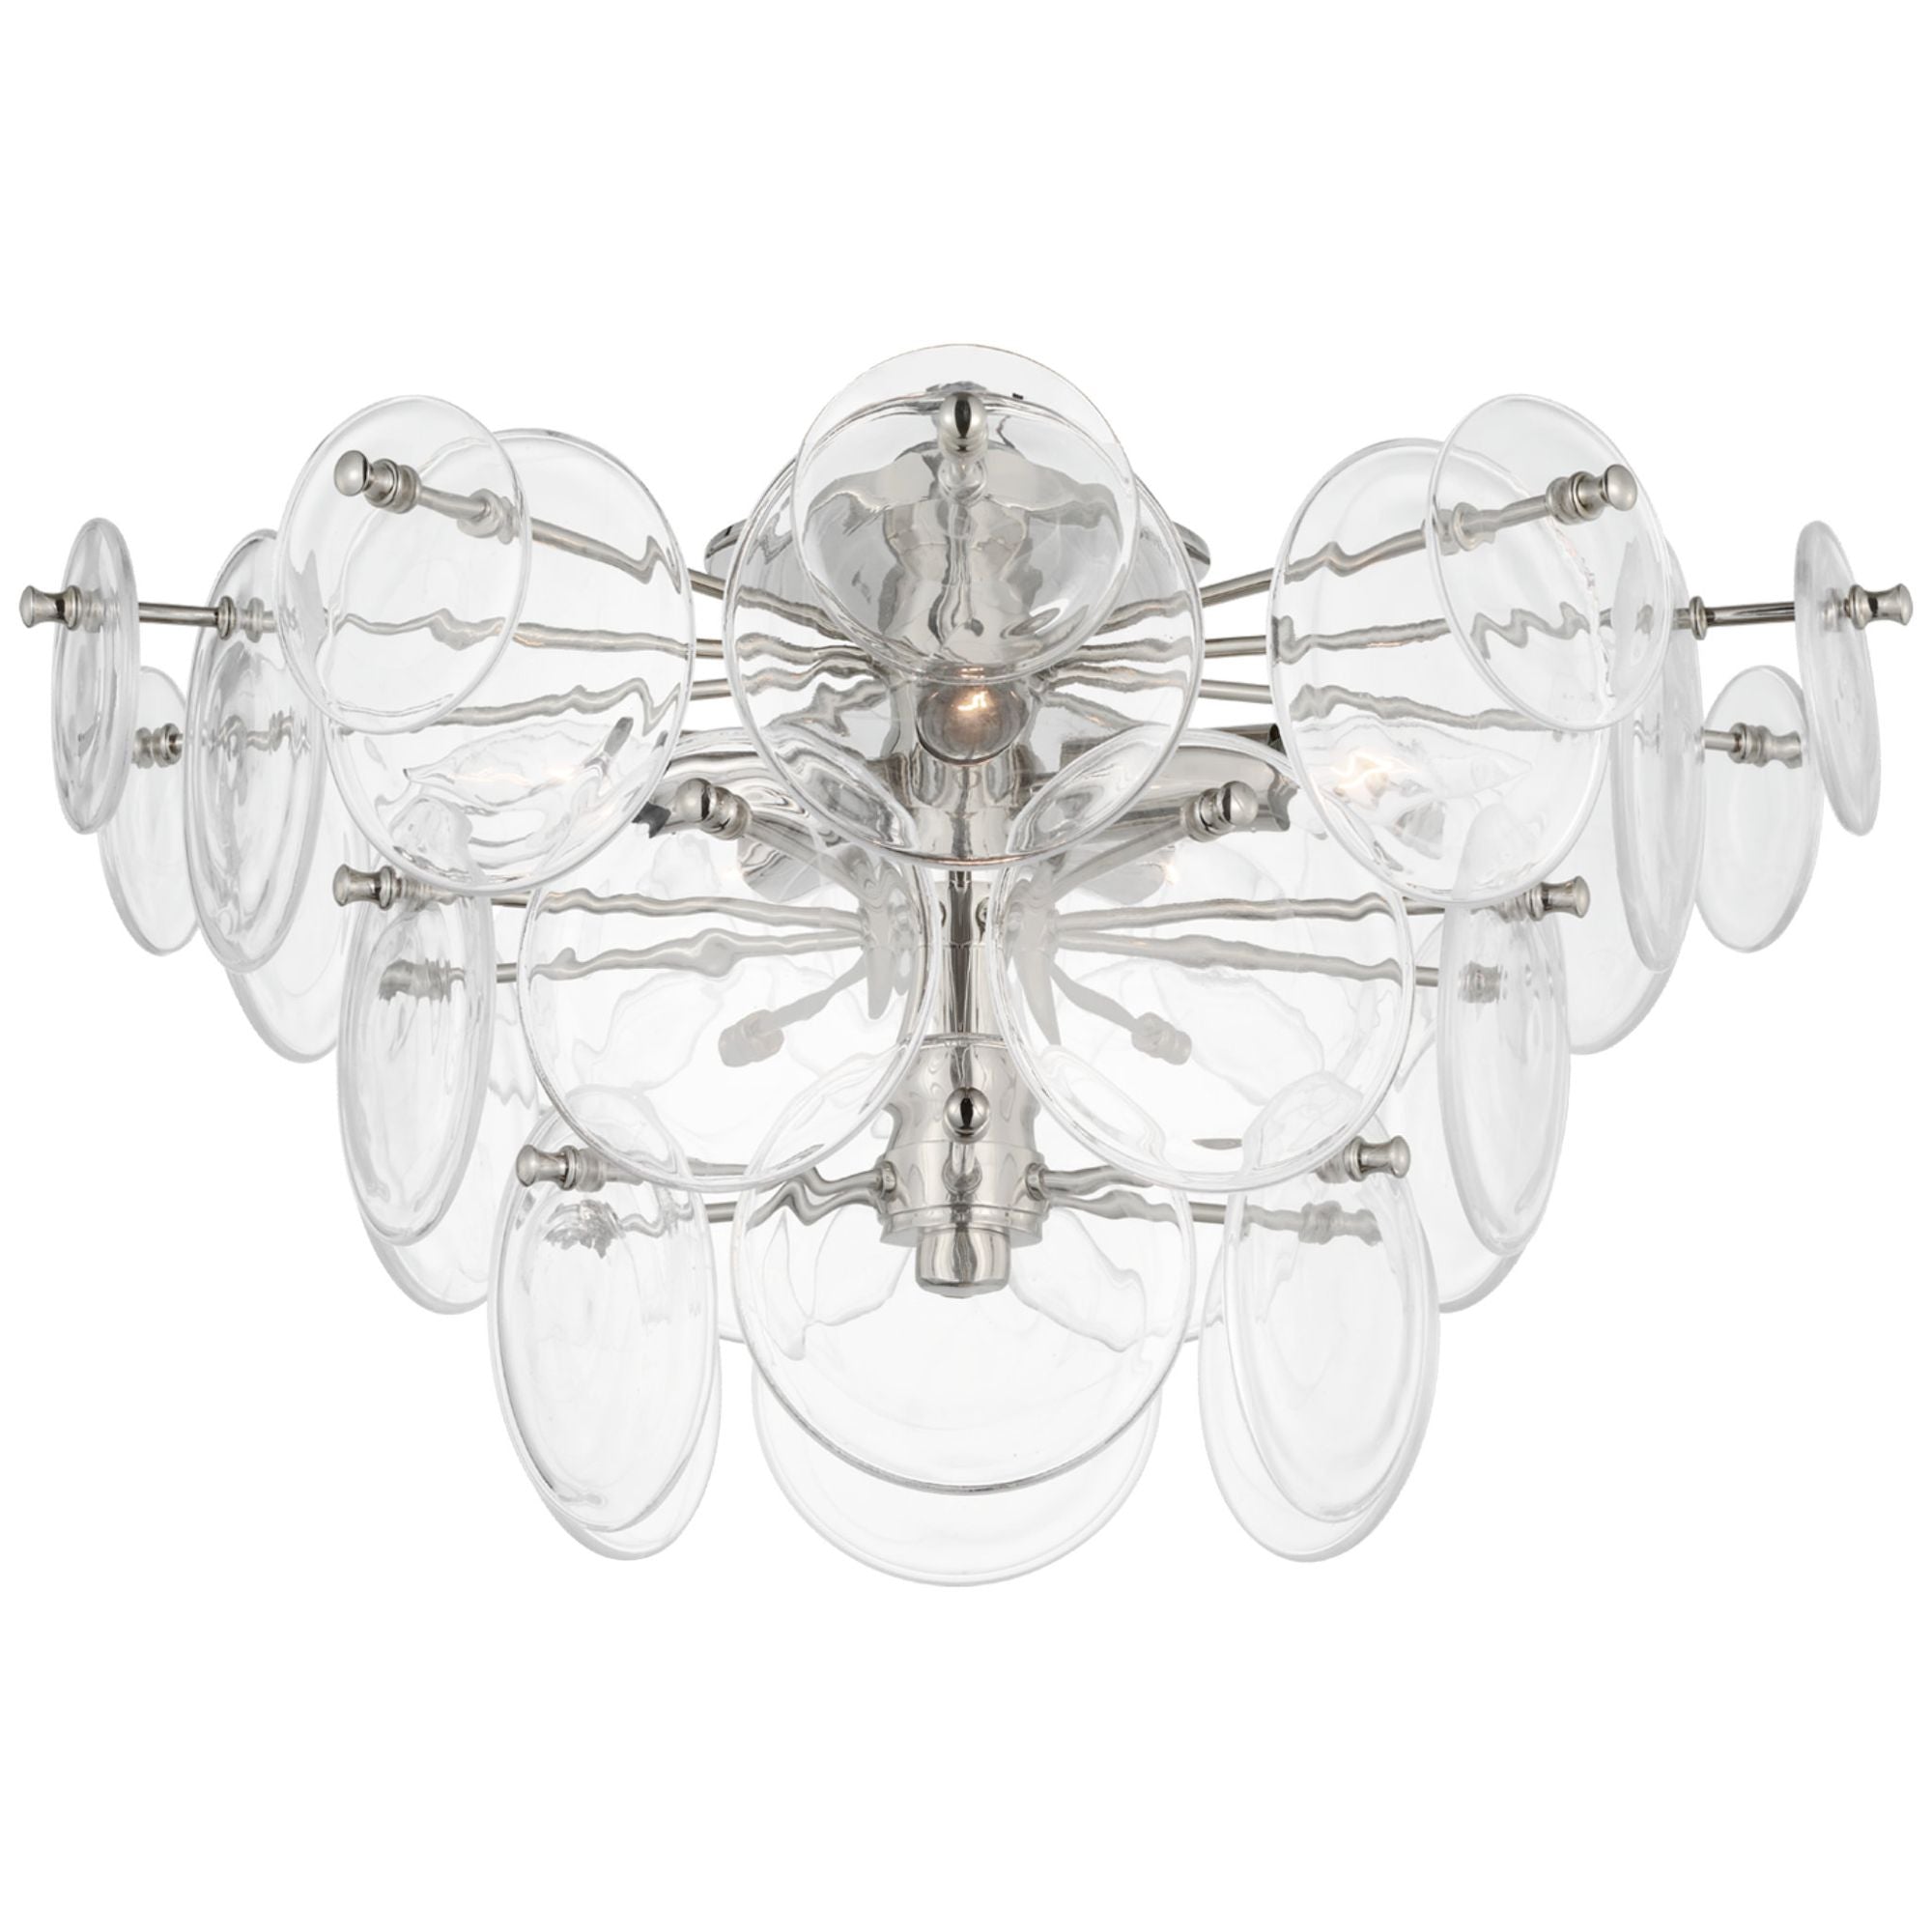 AERIN Loire Large Tiered Flush Mount in Polished Nickel with Clear Strie Glass